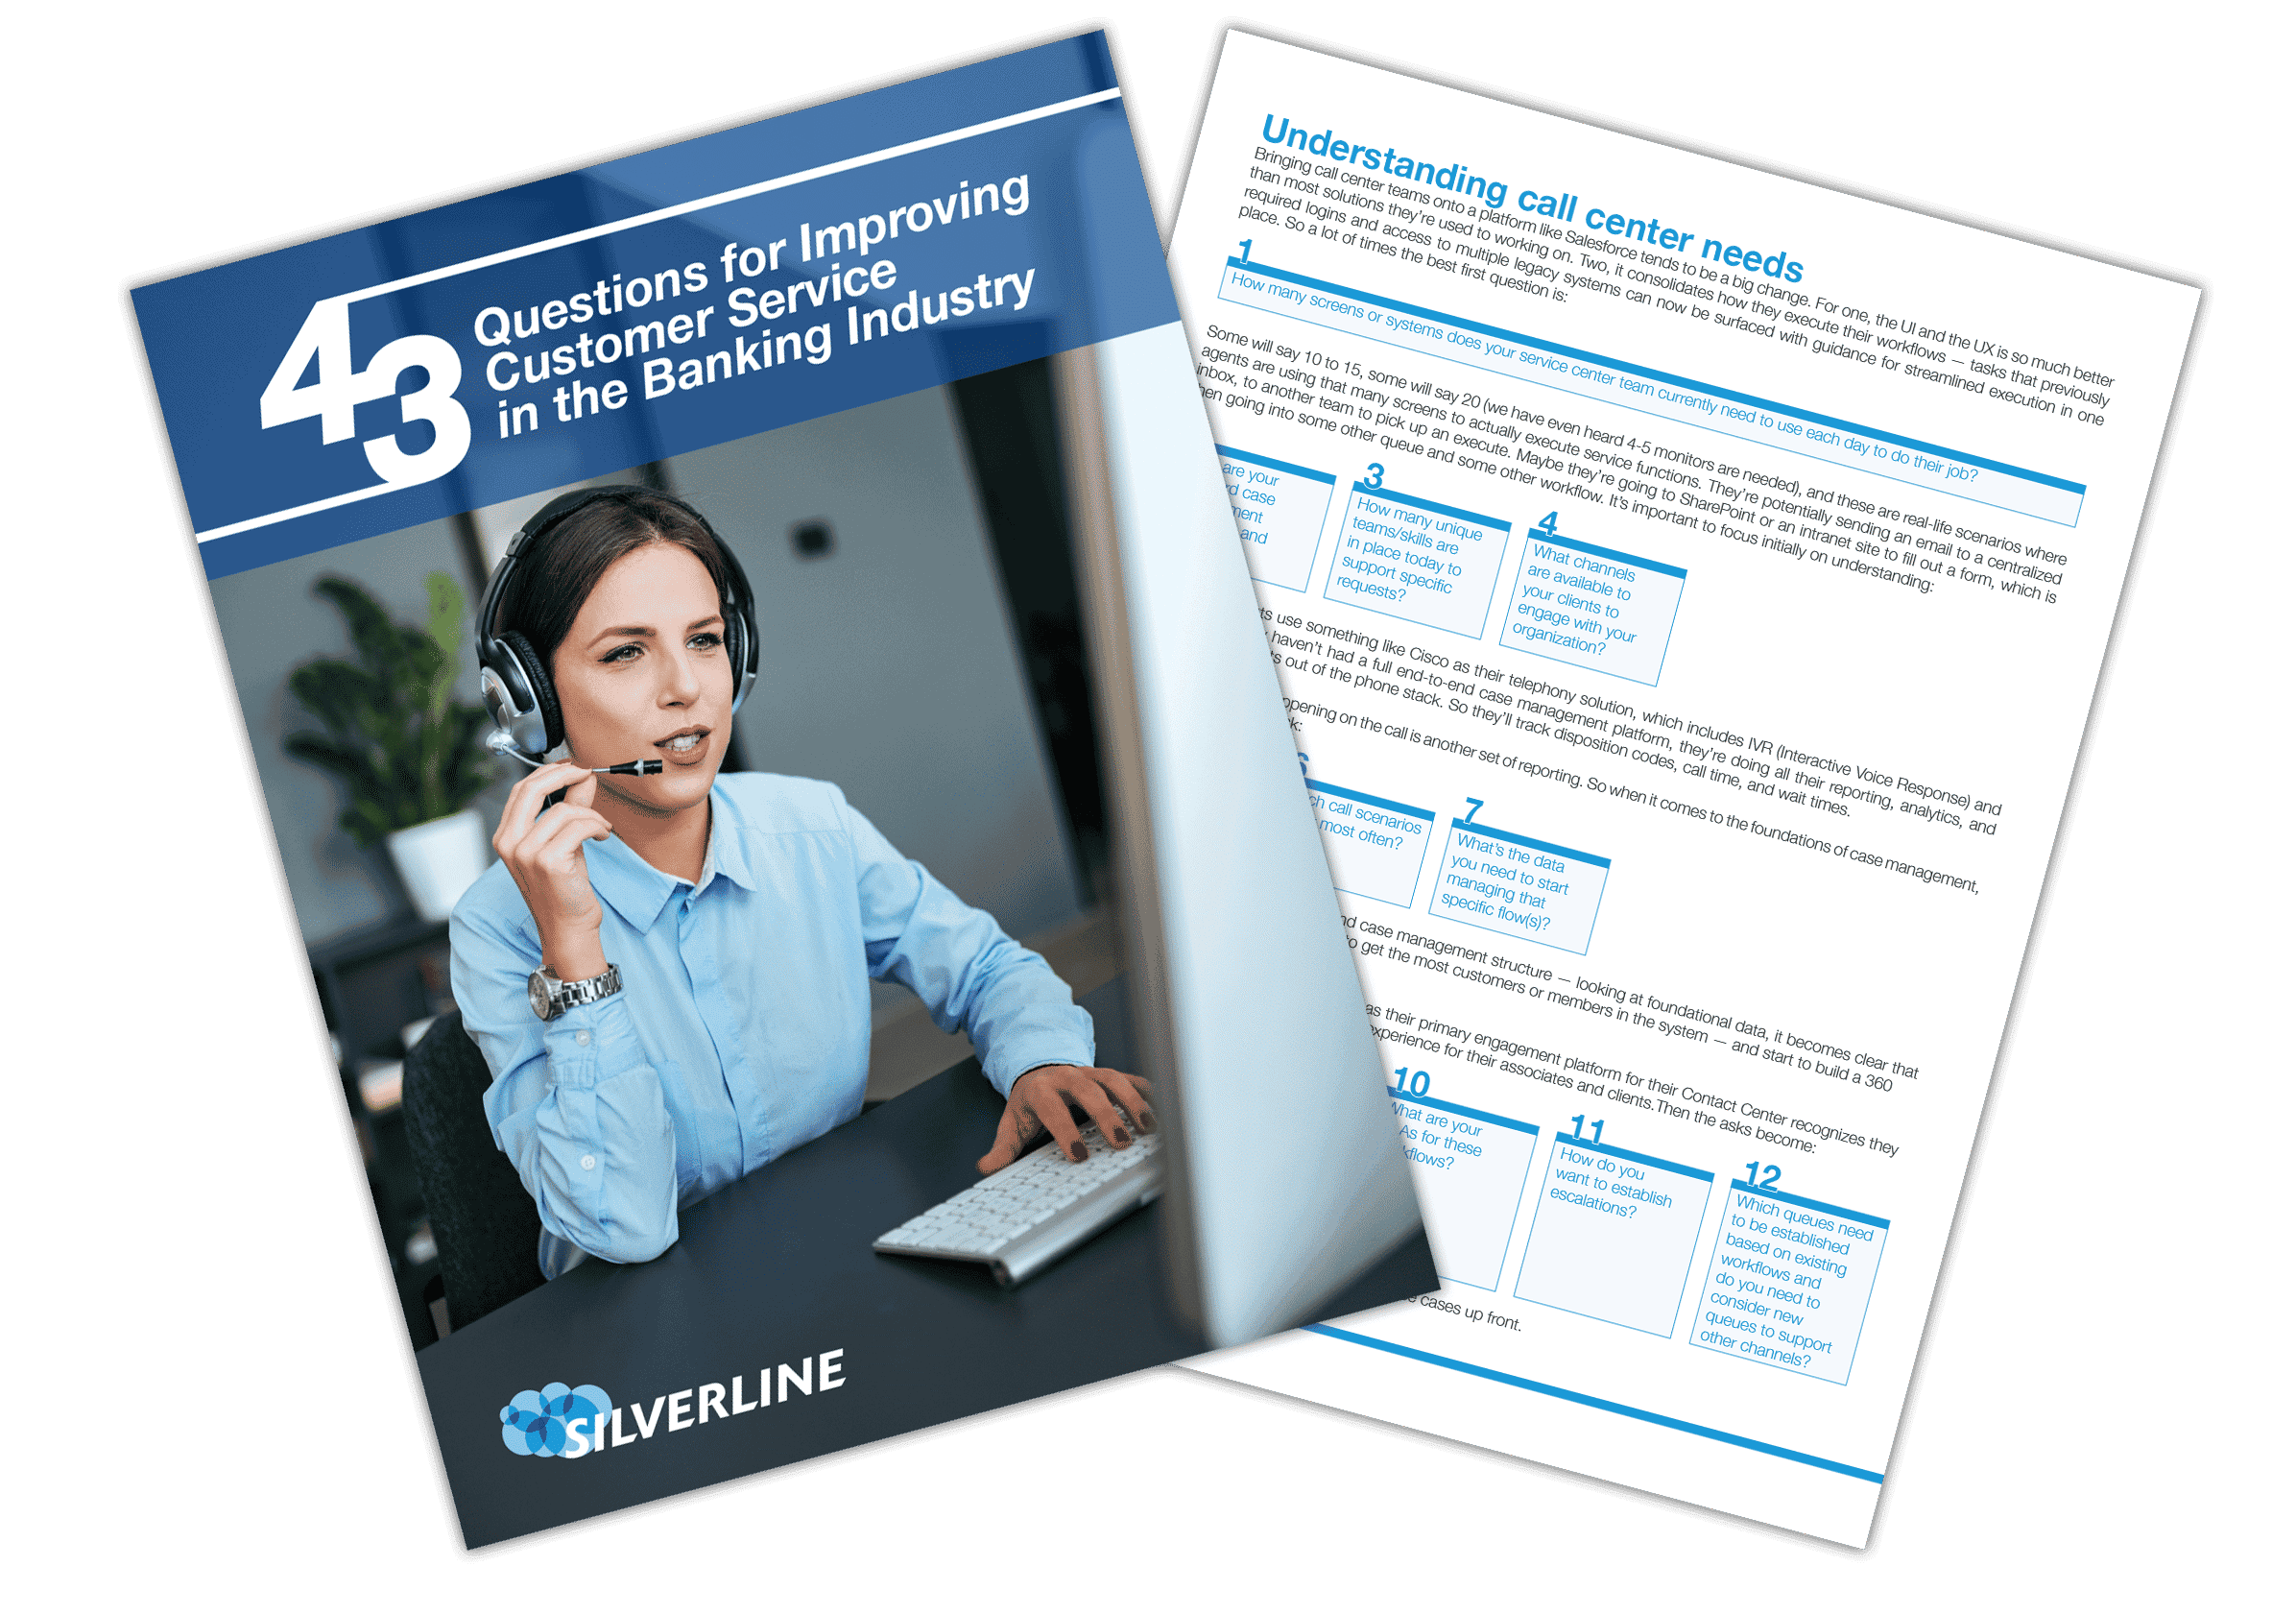 43 questions for improving customer service in the banking industry ebook